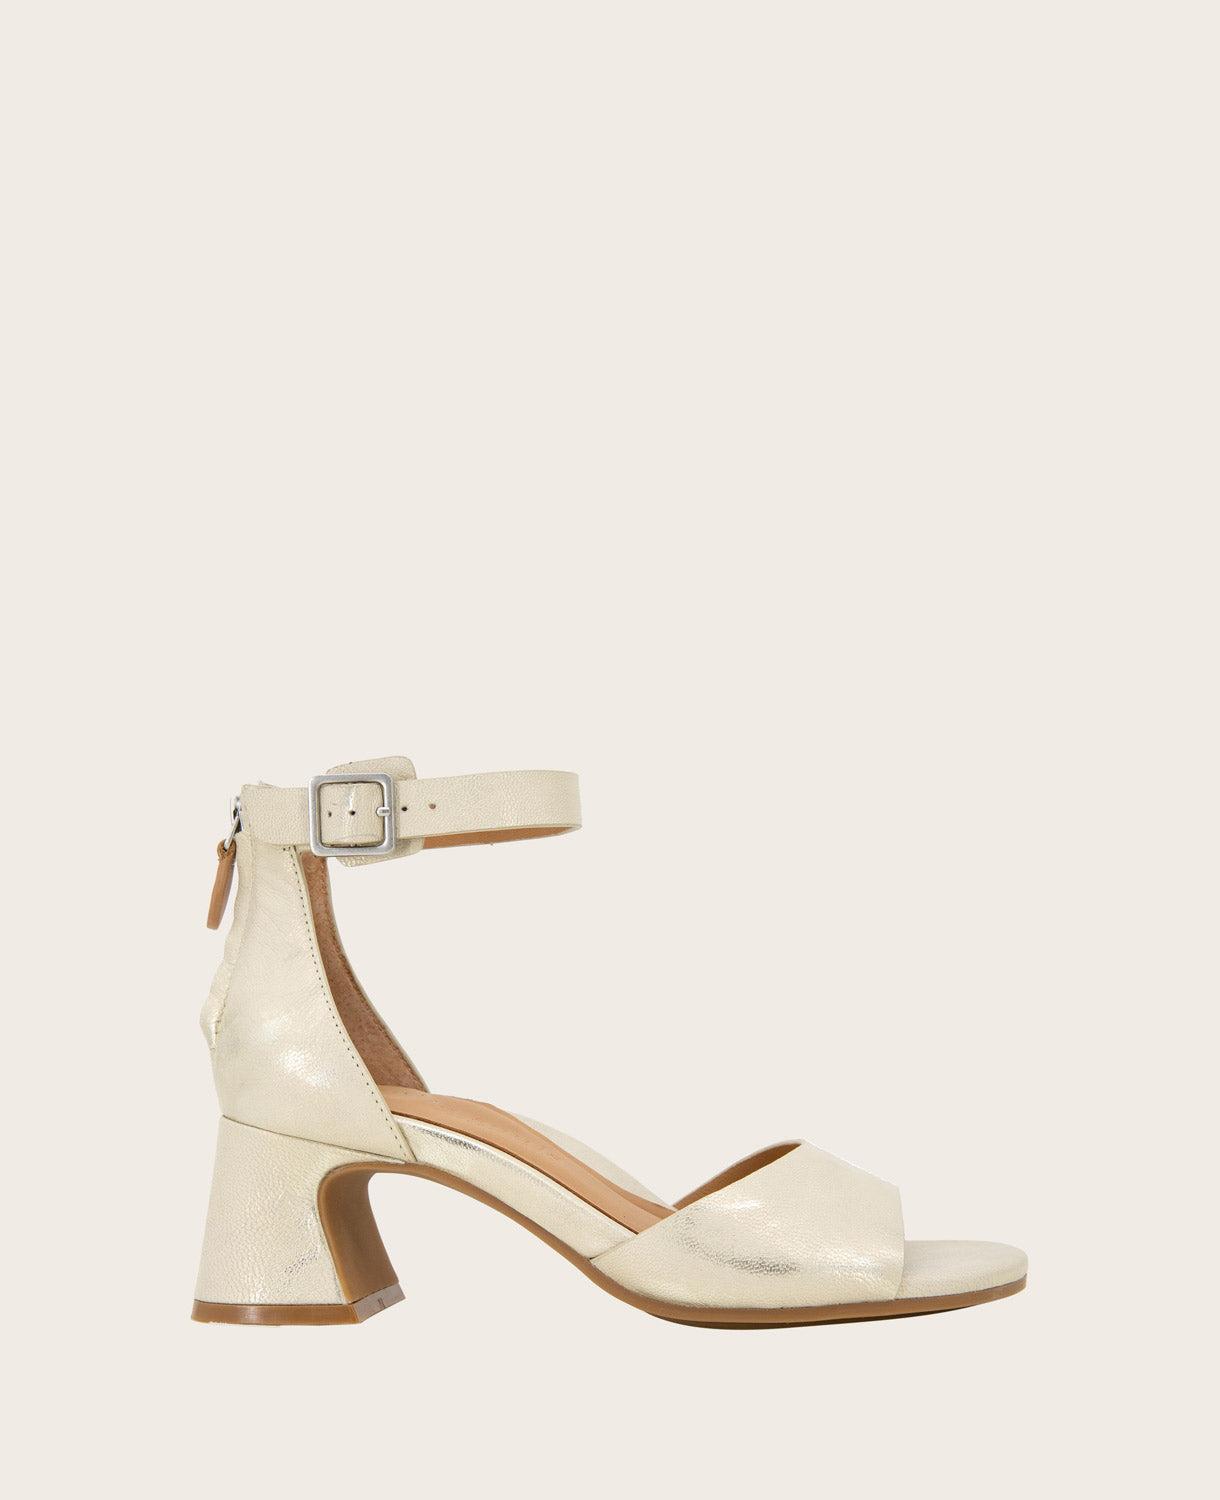 GENTLE SOULS BY KENNETH COLE Iona Block Heel Sandal Product Image